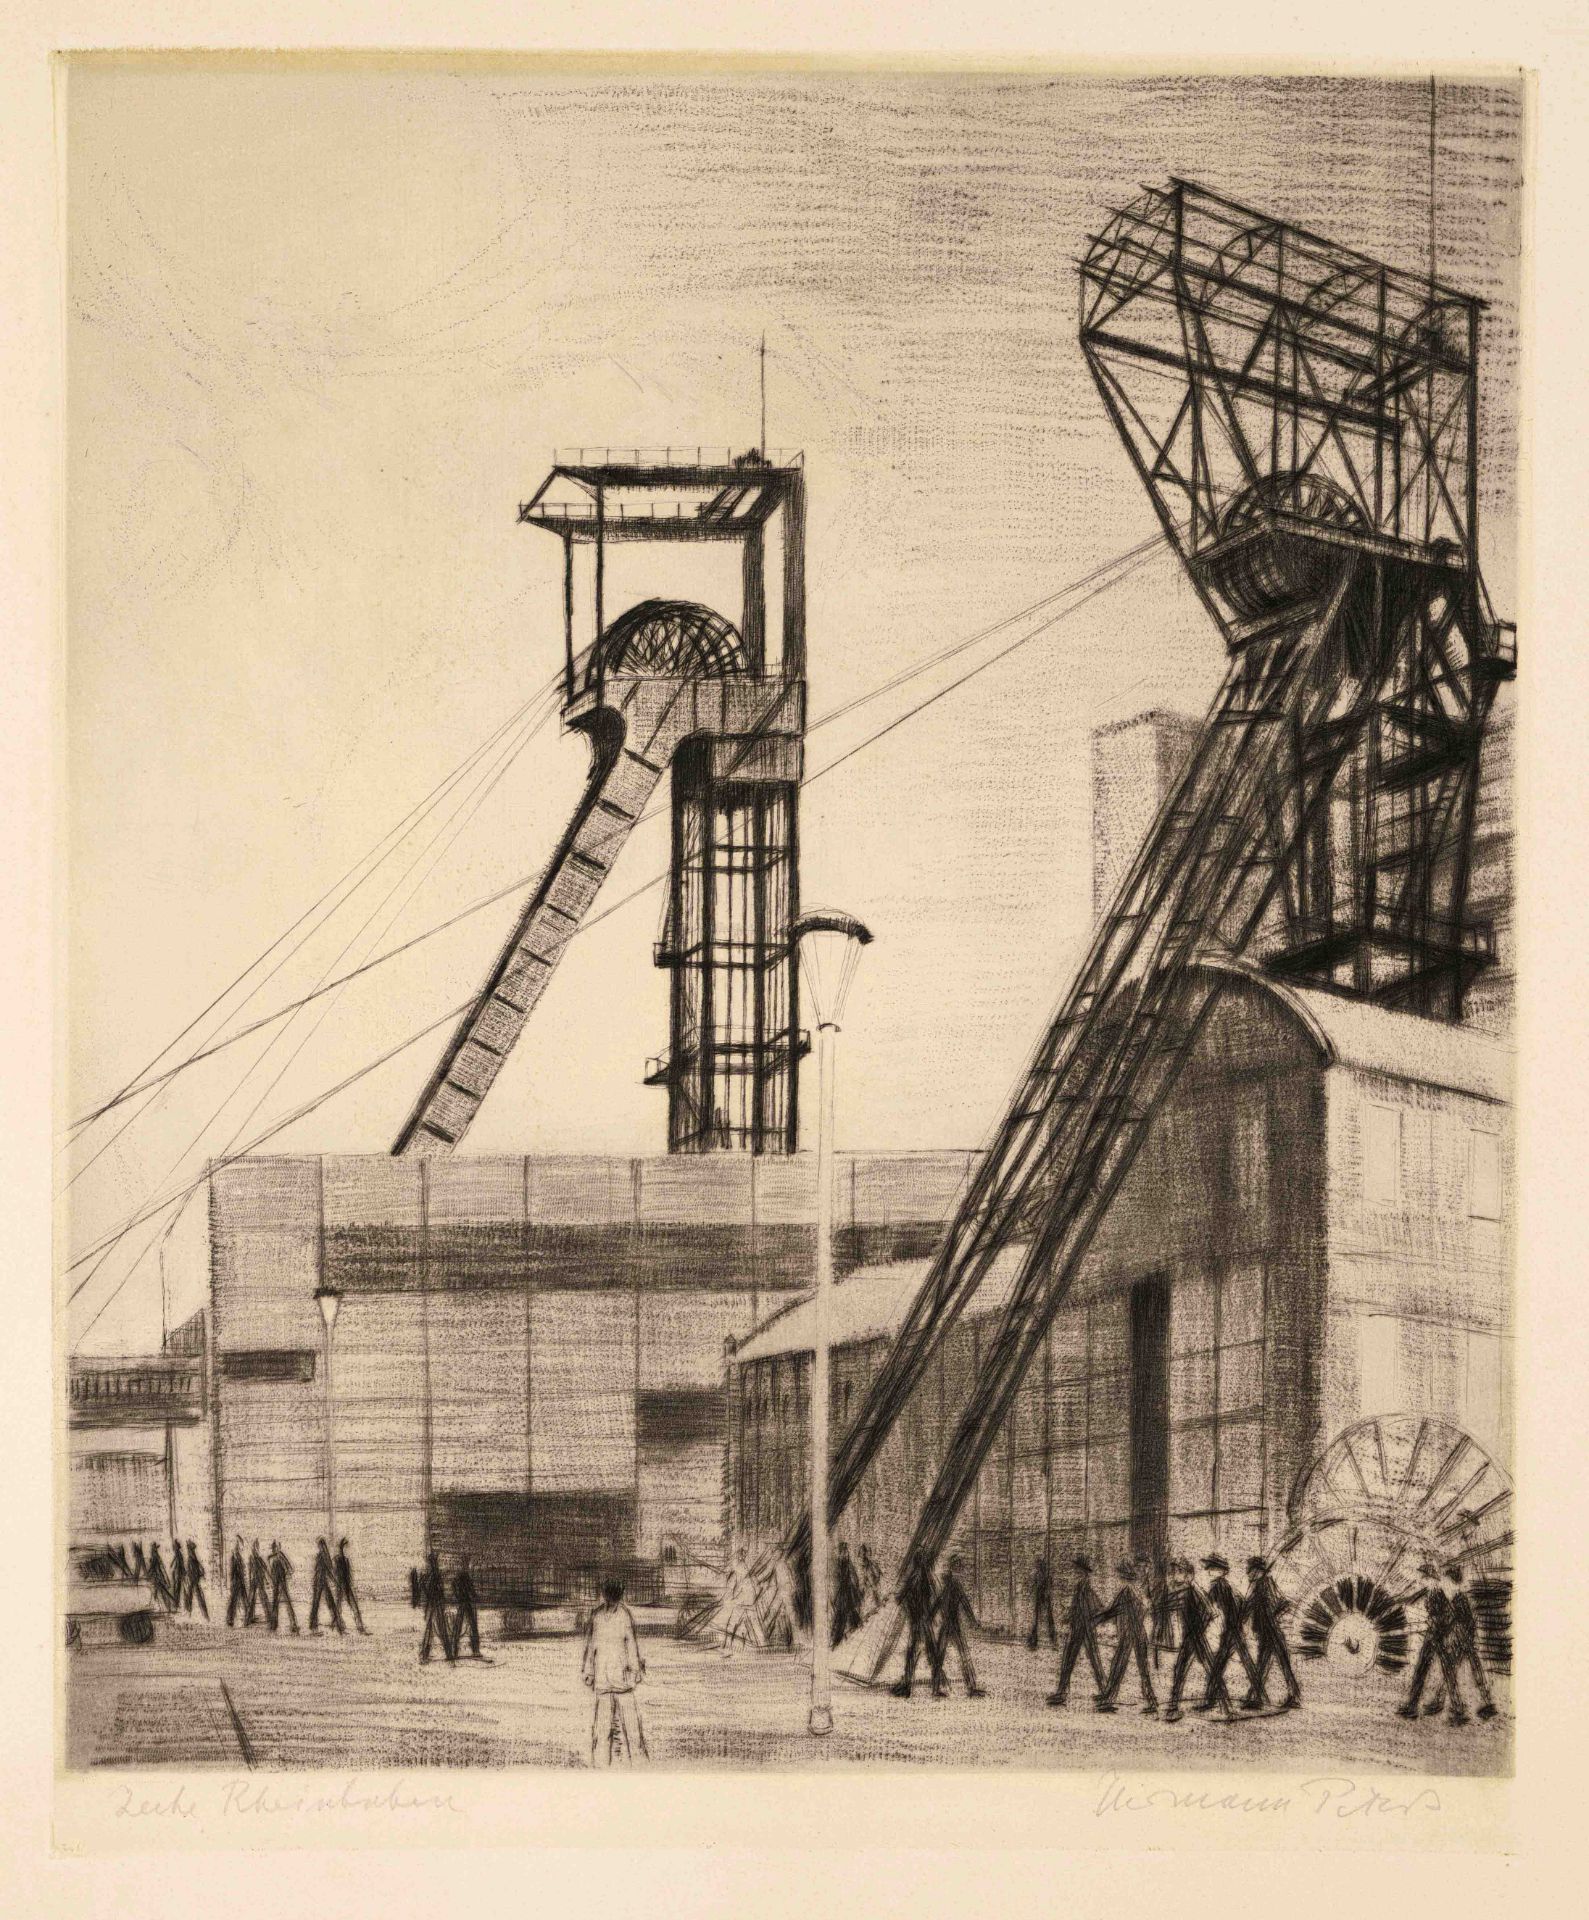 Mixed lot of 10 etchings by various artists, 1st half of the 20th century, with motifs from mining - Image 4 of 4